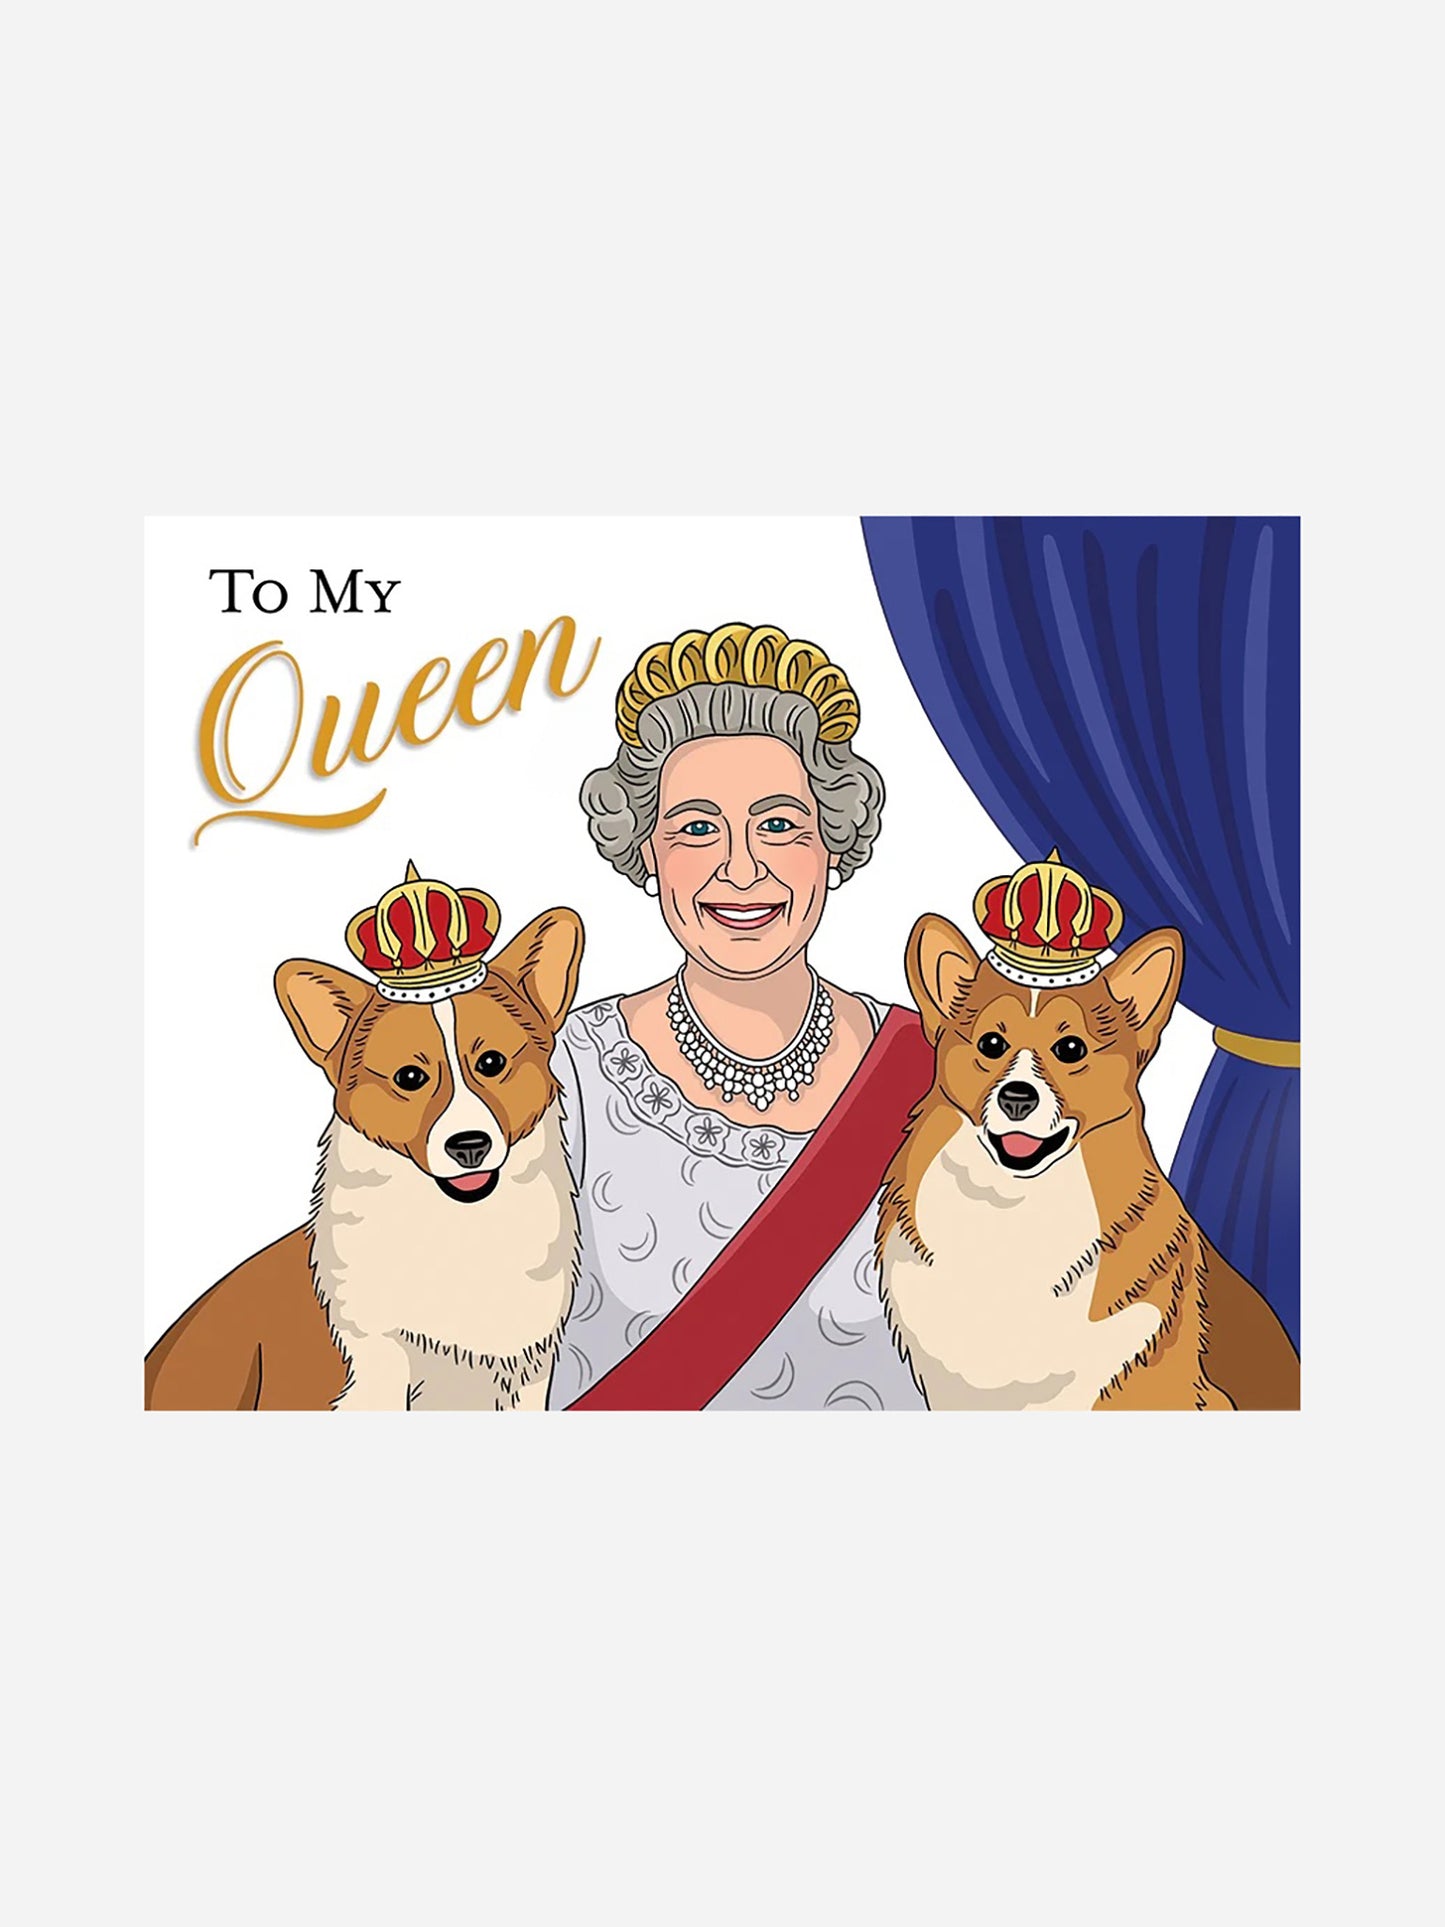 The Found Queen of England Mother's Day Card